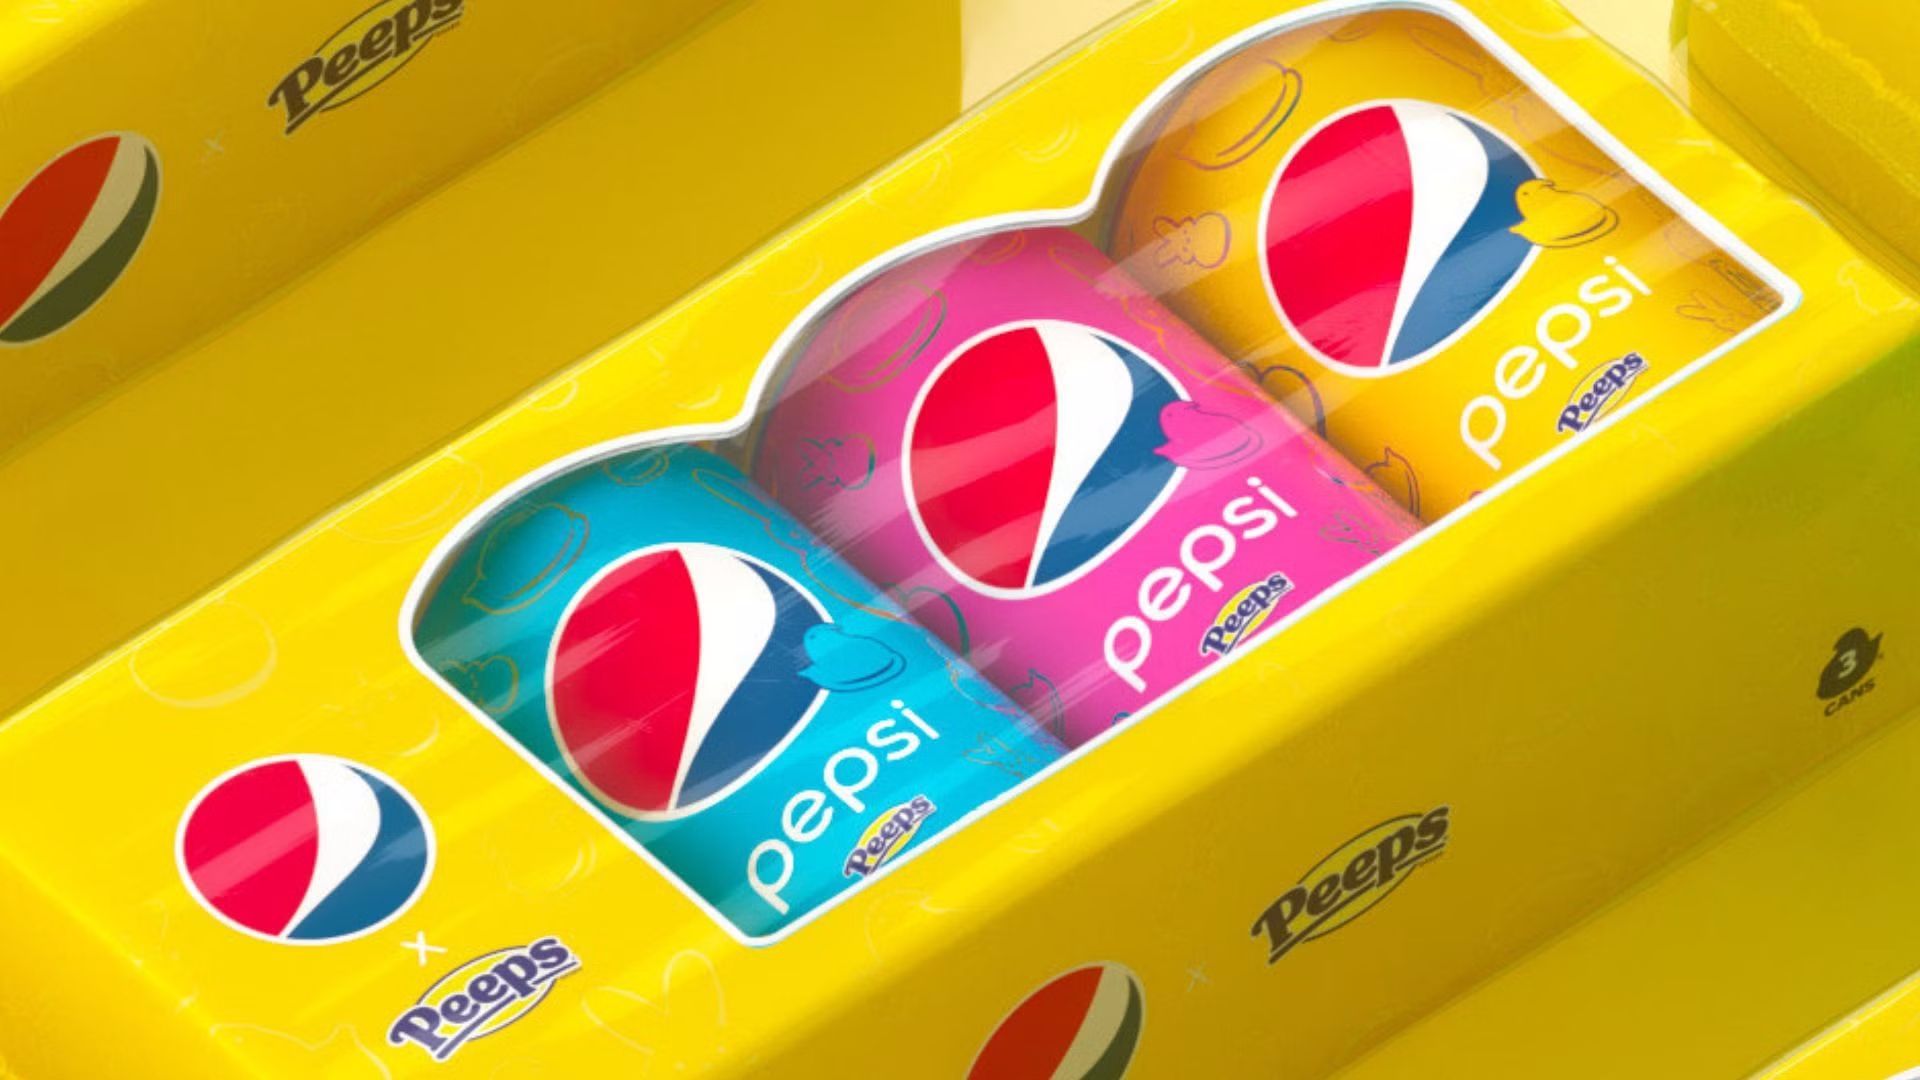 Peeps Pepsi returning stores before its expected schedule